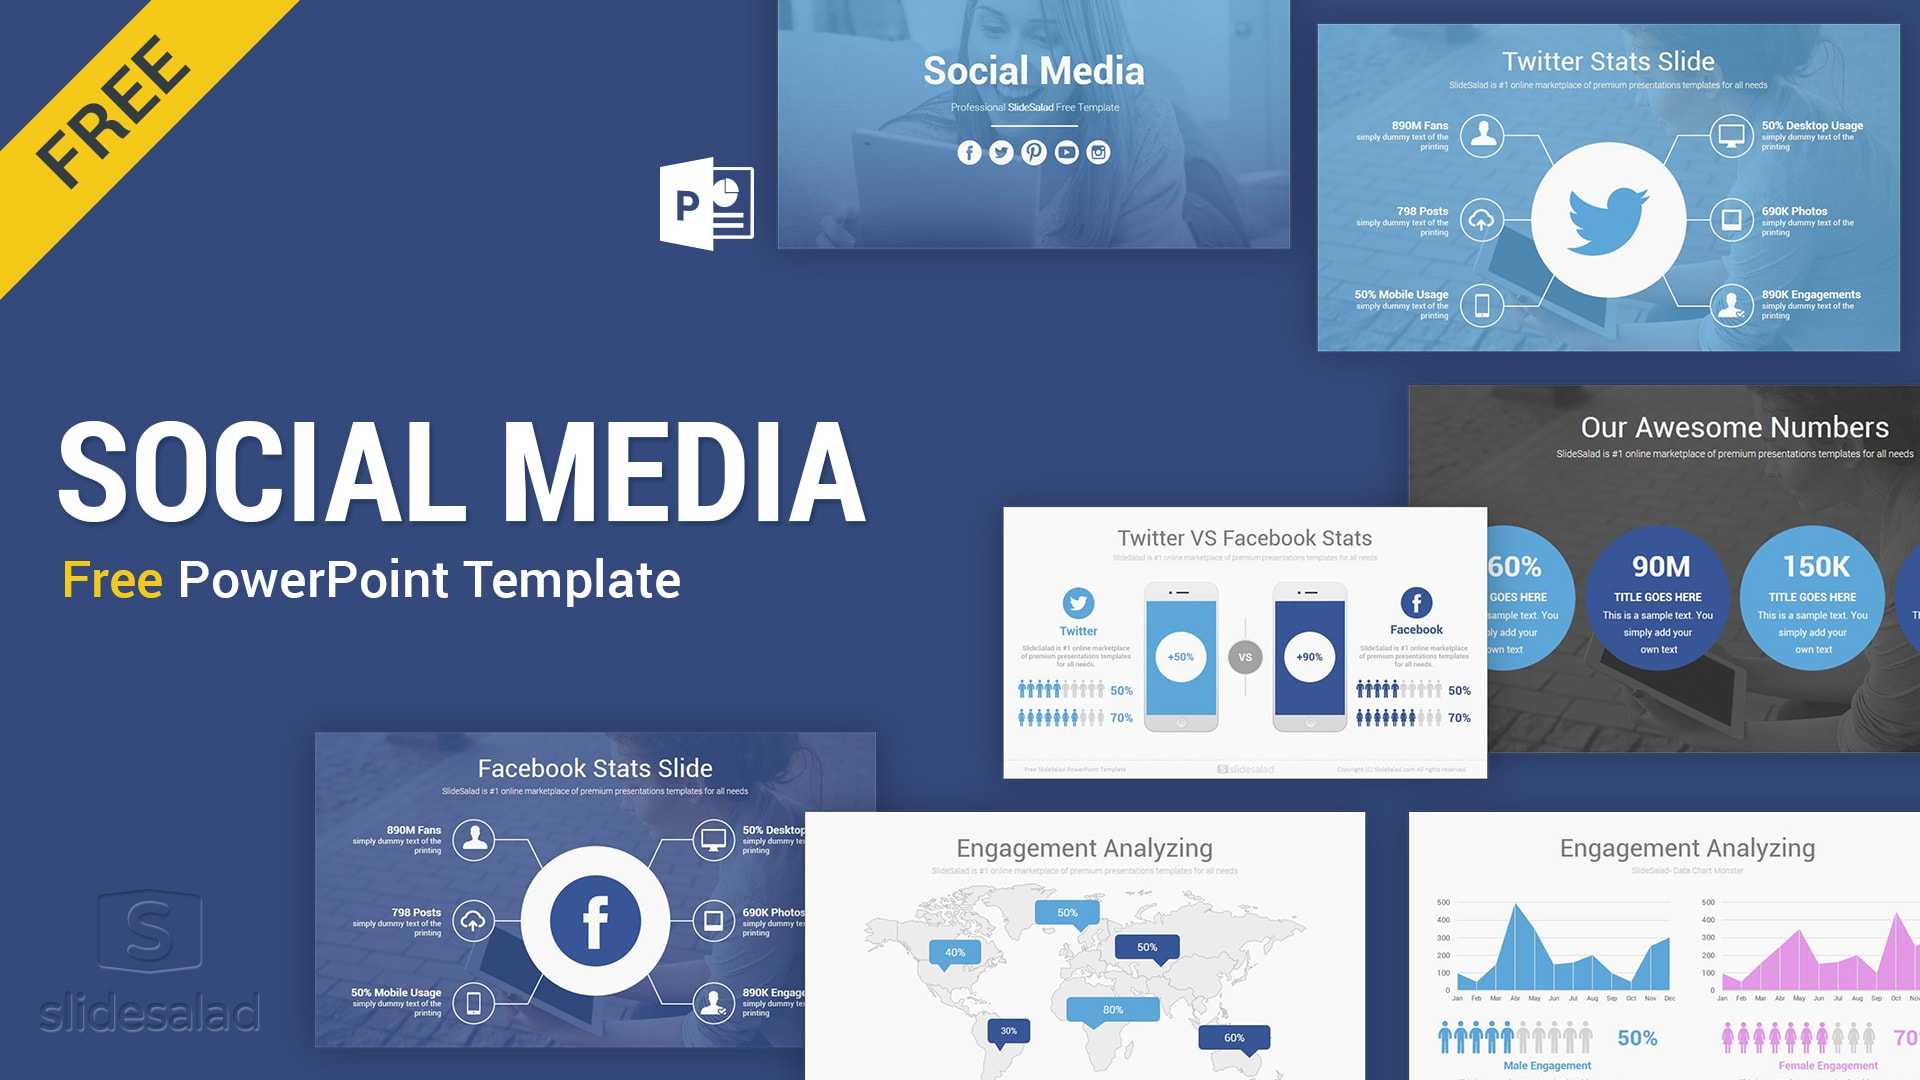 Social Media Free Powerpoint Template Ppt Slides – Slidesalad With Regard To Biography Powerpoint Template